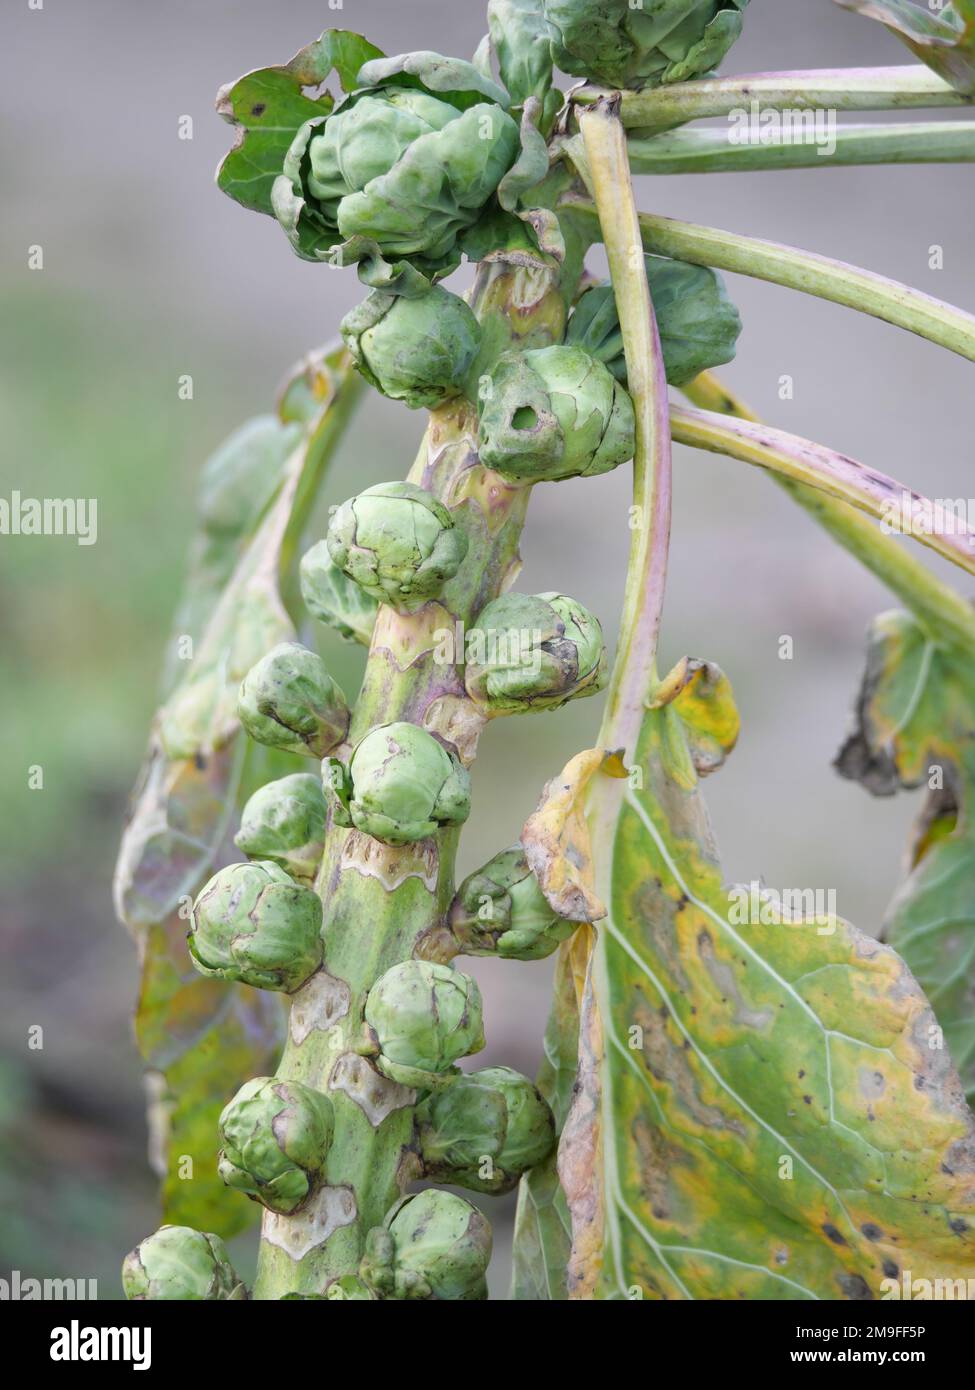 Detail of florets of a Brussels sprout as a winter vegetable in the kitchen garden for harvesting Stock Photo